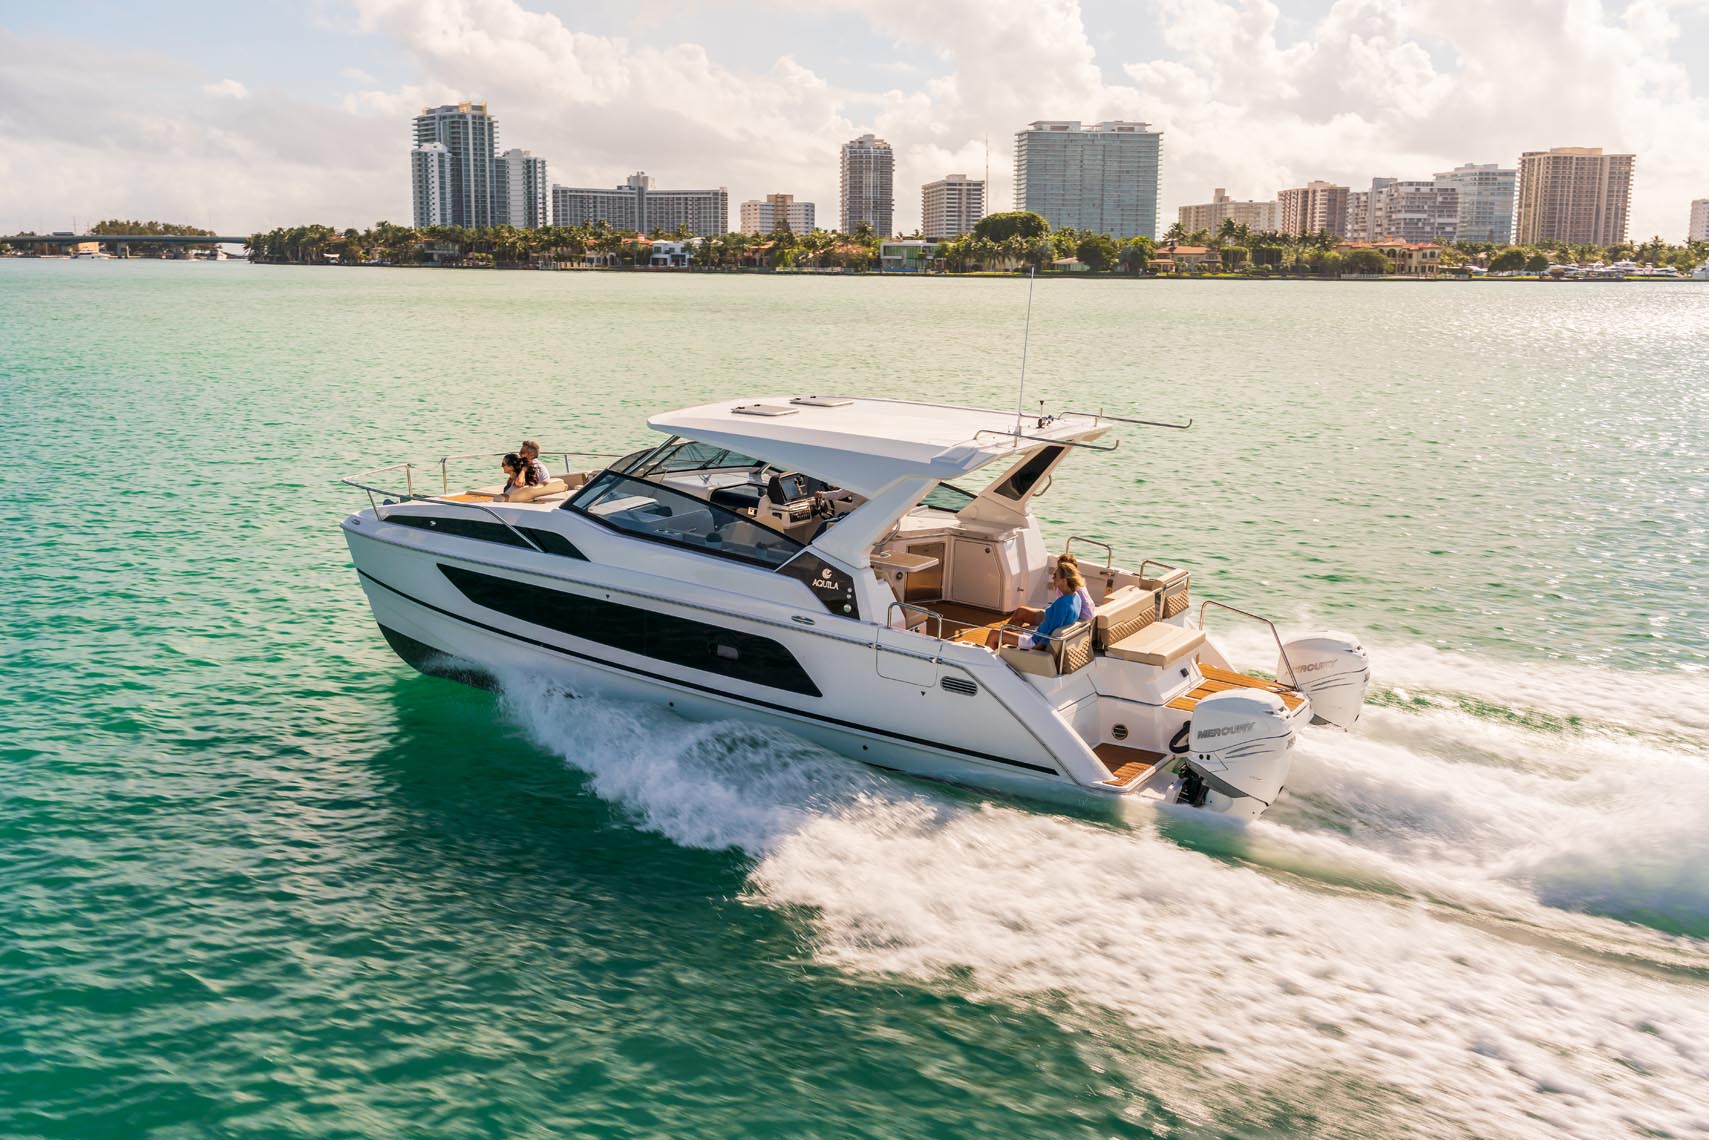 Boat boating  luxury yacht marine lifestyle Florida photographer Steinberger Boat boating  luxury yacht marine lifestyle photographer Steinberger shoots in Florida, Minnesota, Wisconsin, Tennessee, worldwide 